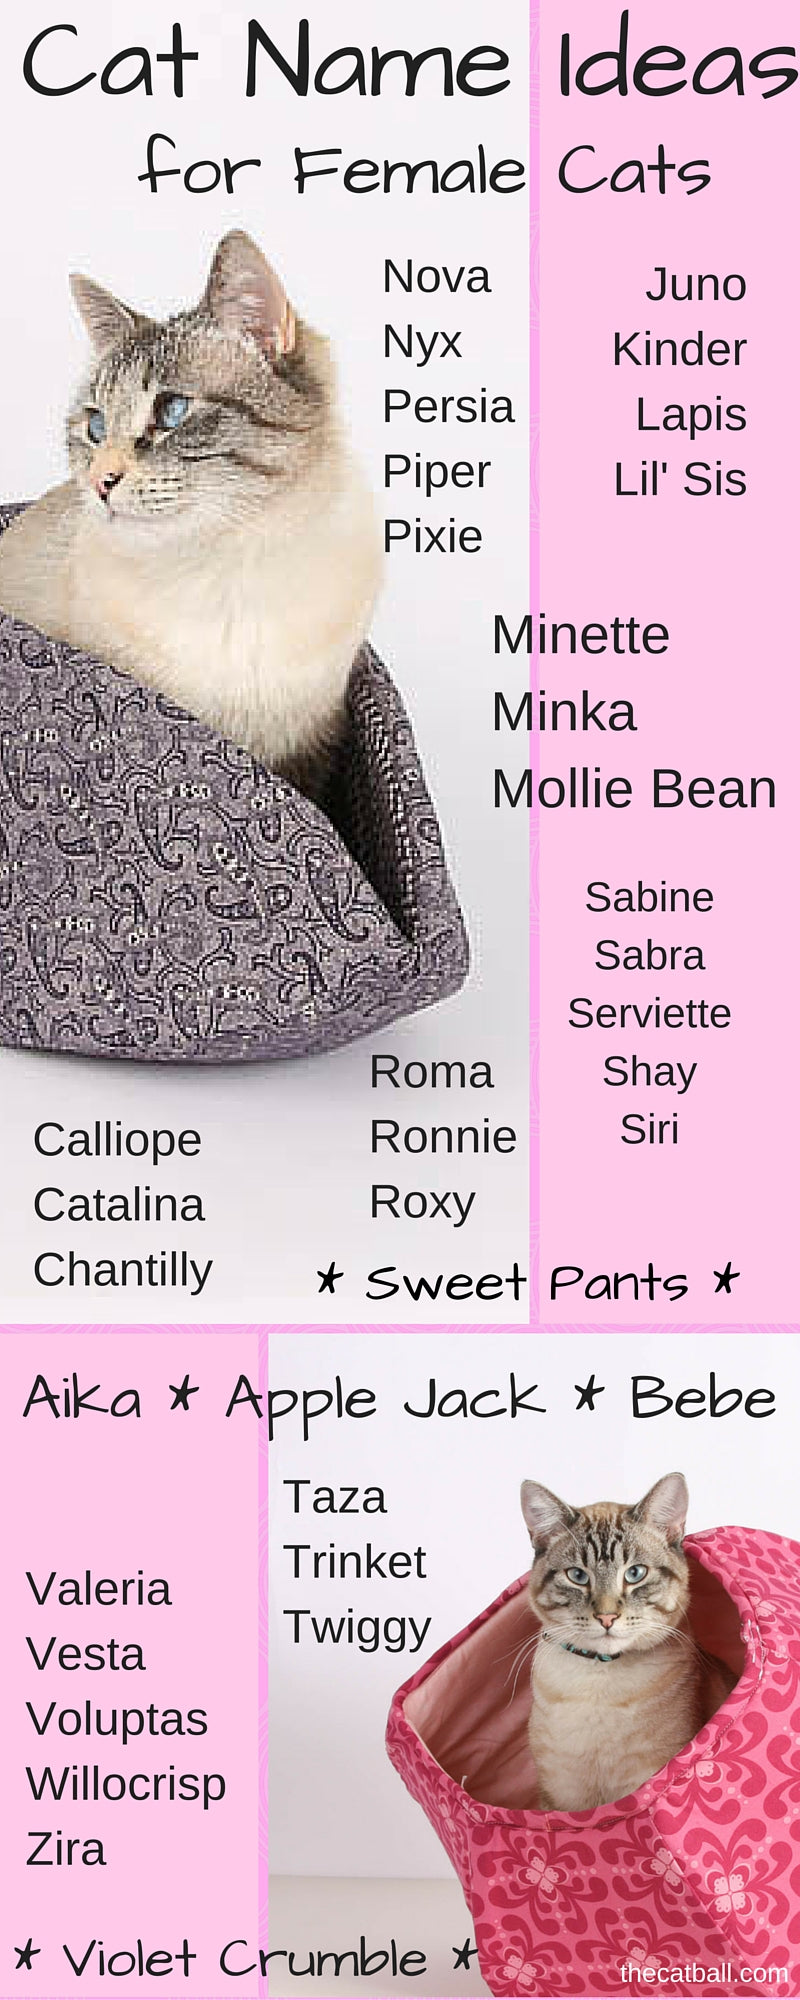 Cat name ideas for female cats